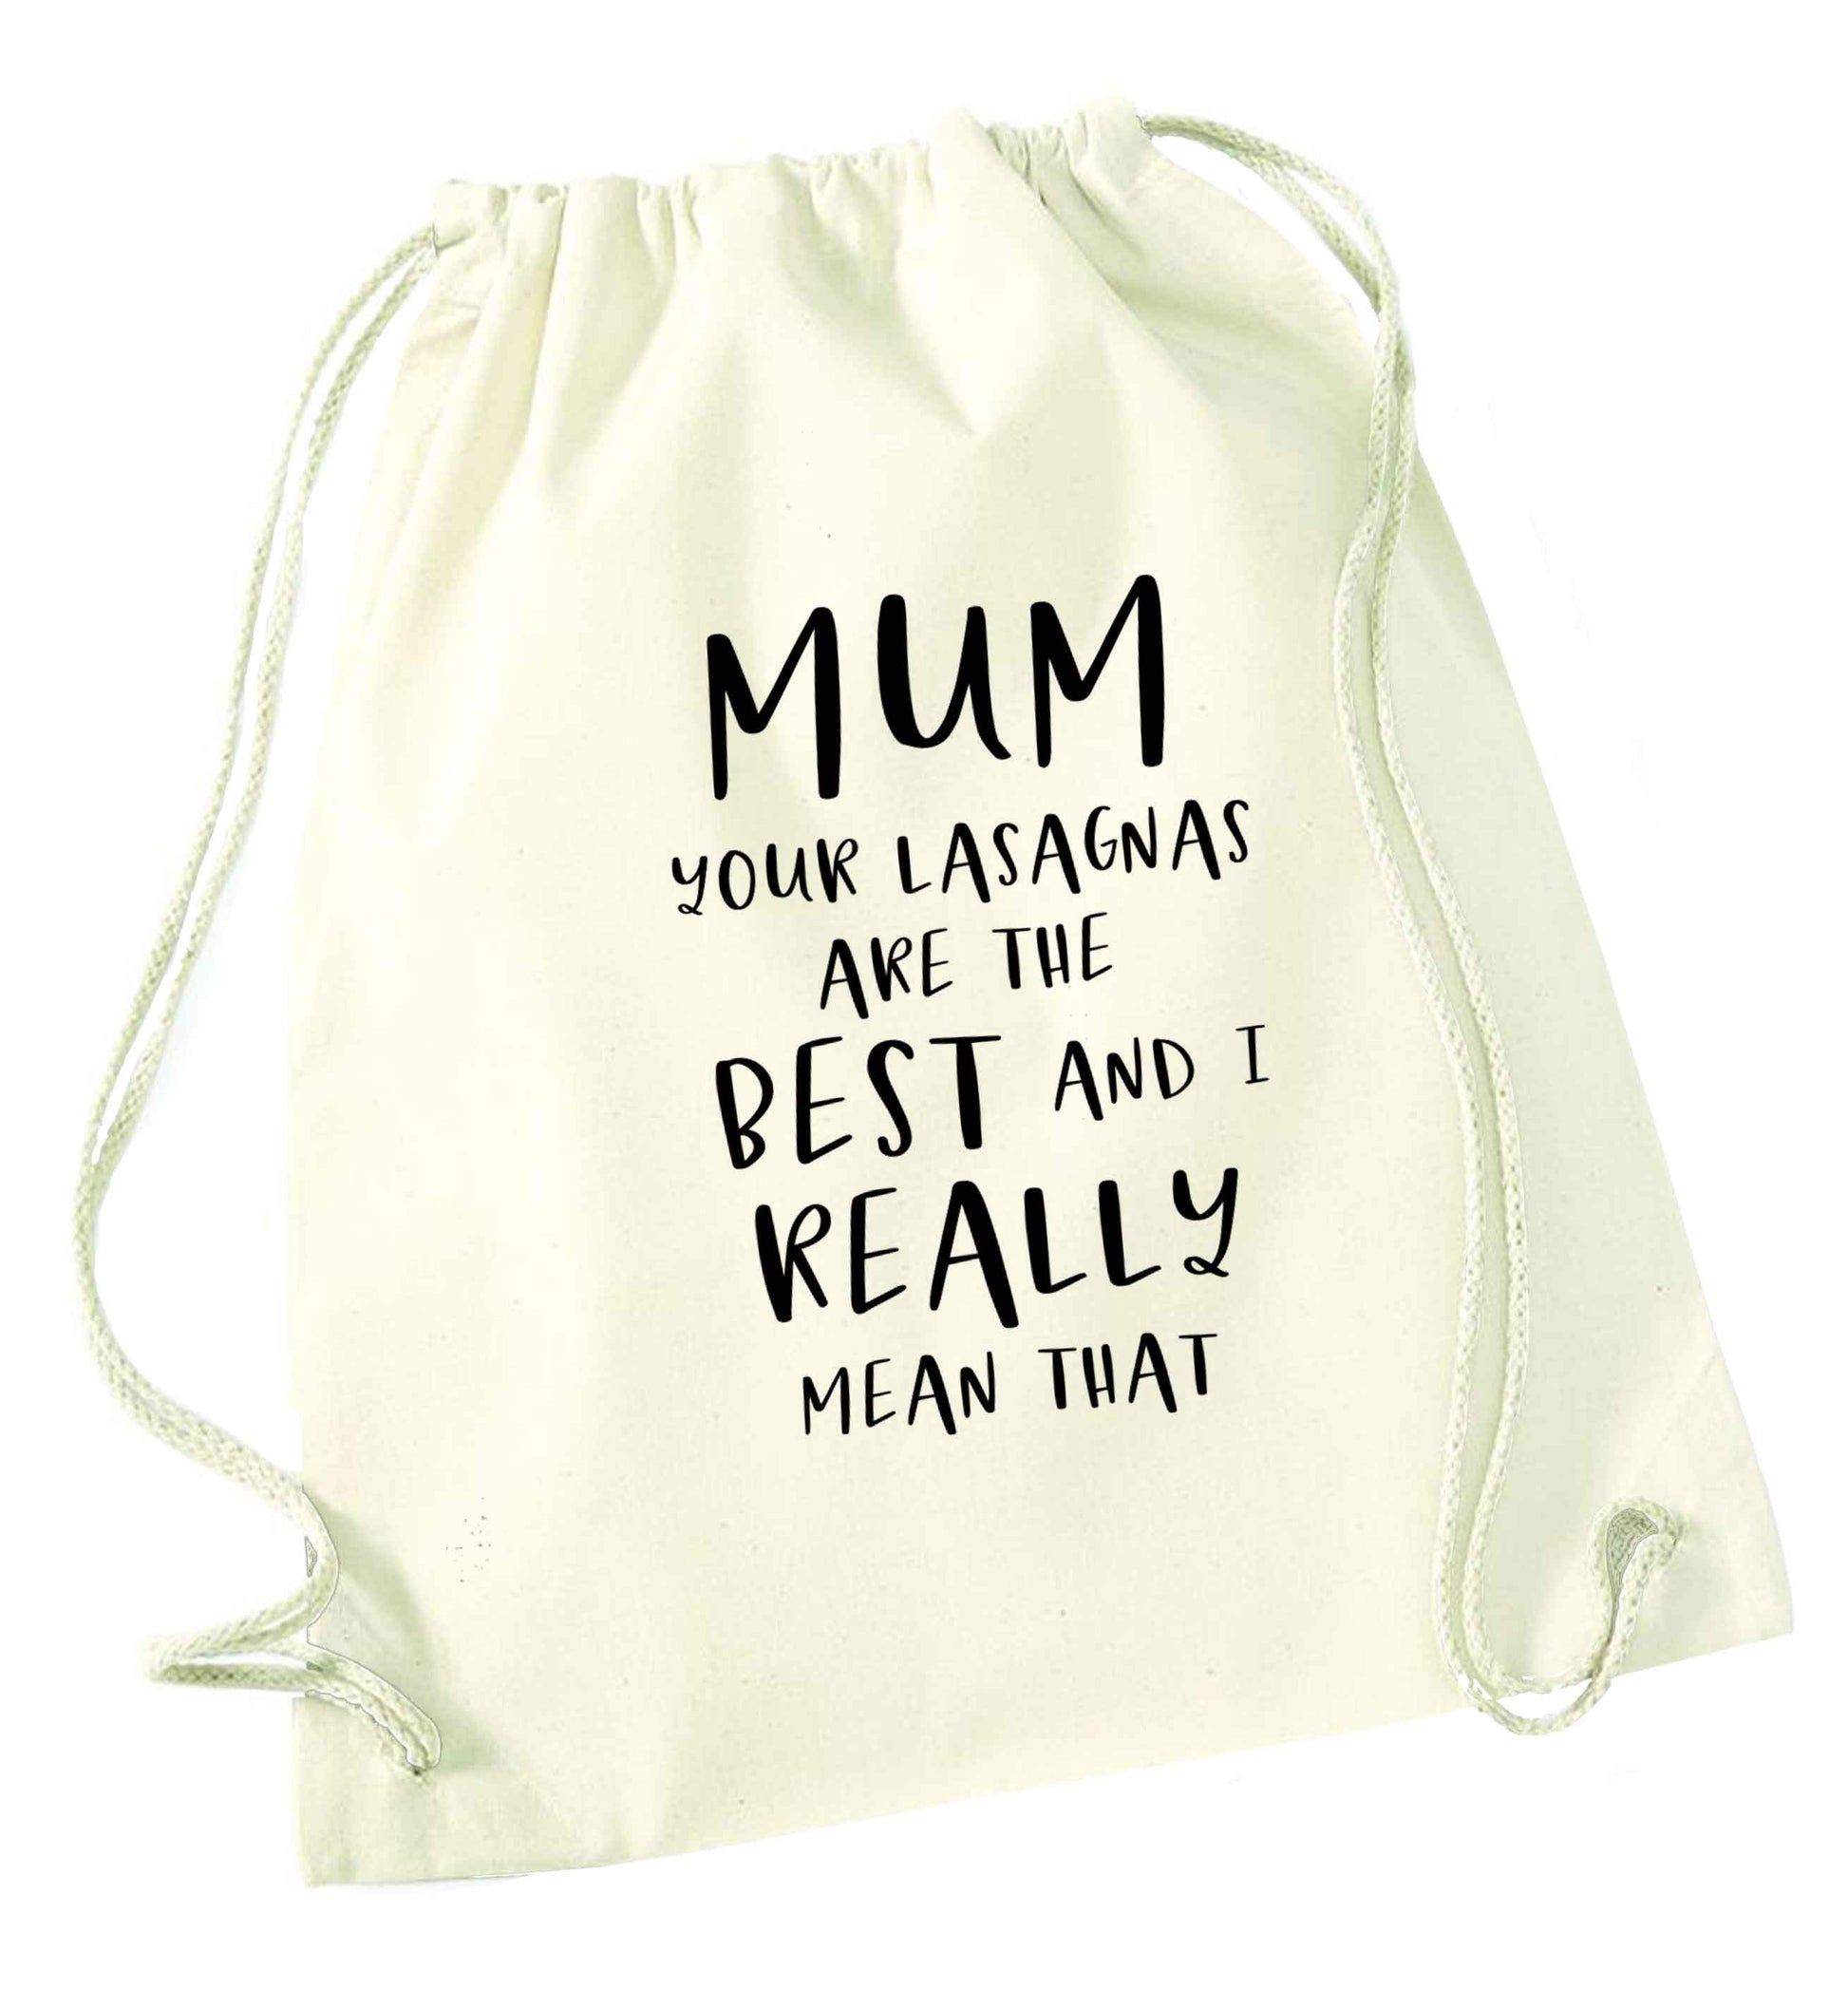 Mum your lasagnas are the best and I really mean that | Drawstring Bag